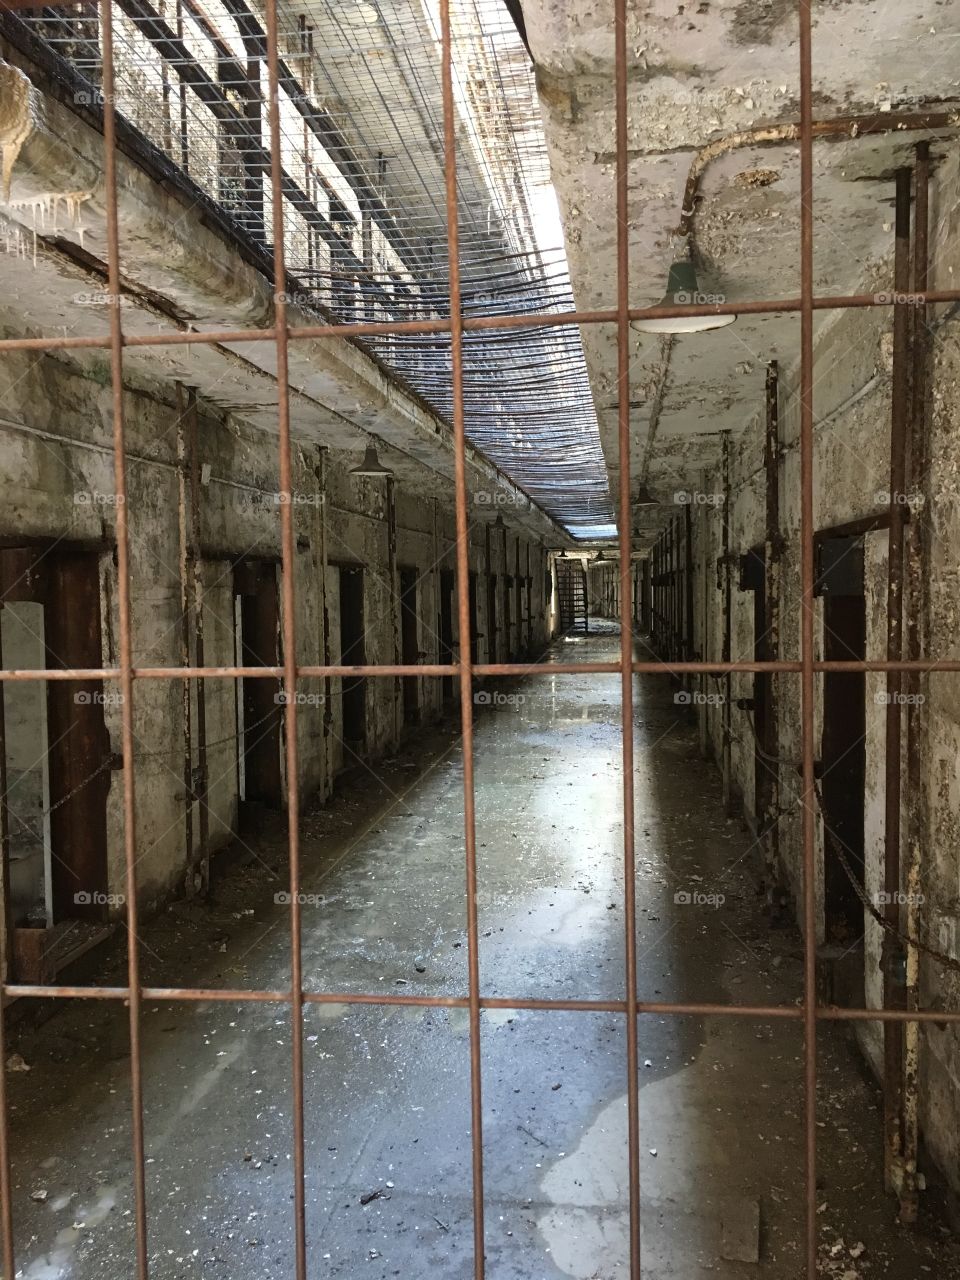 A guards view (Eastern State Penitentiary) 